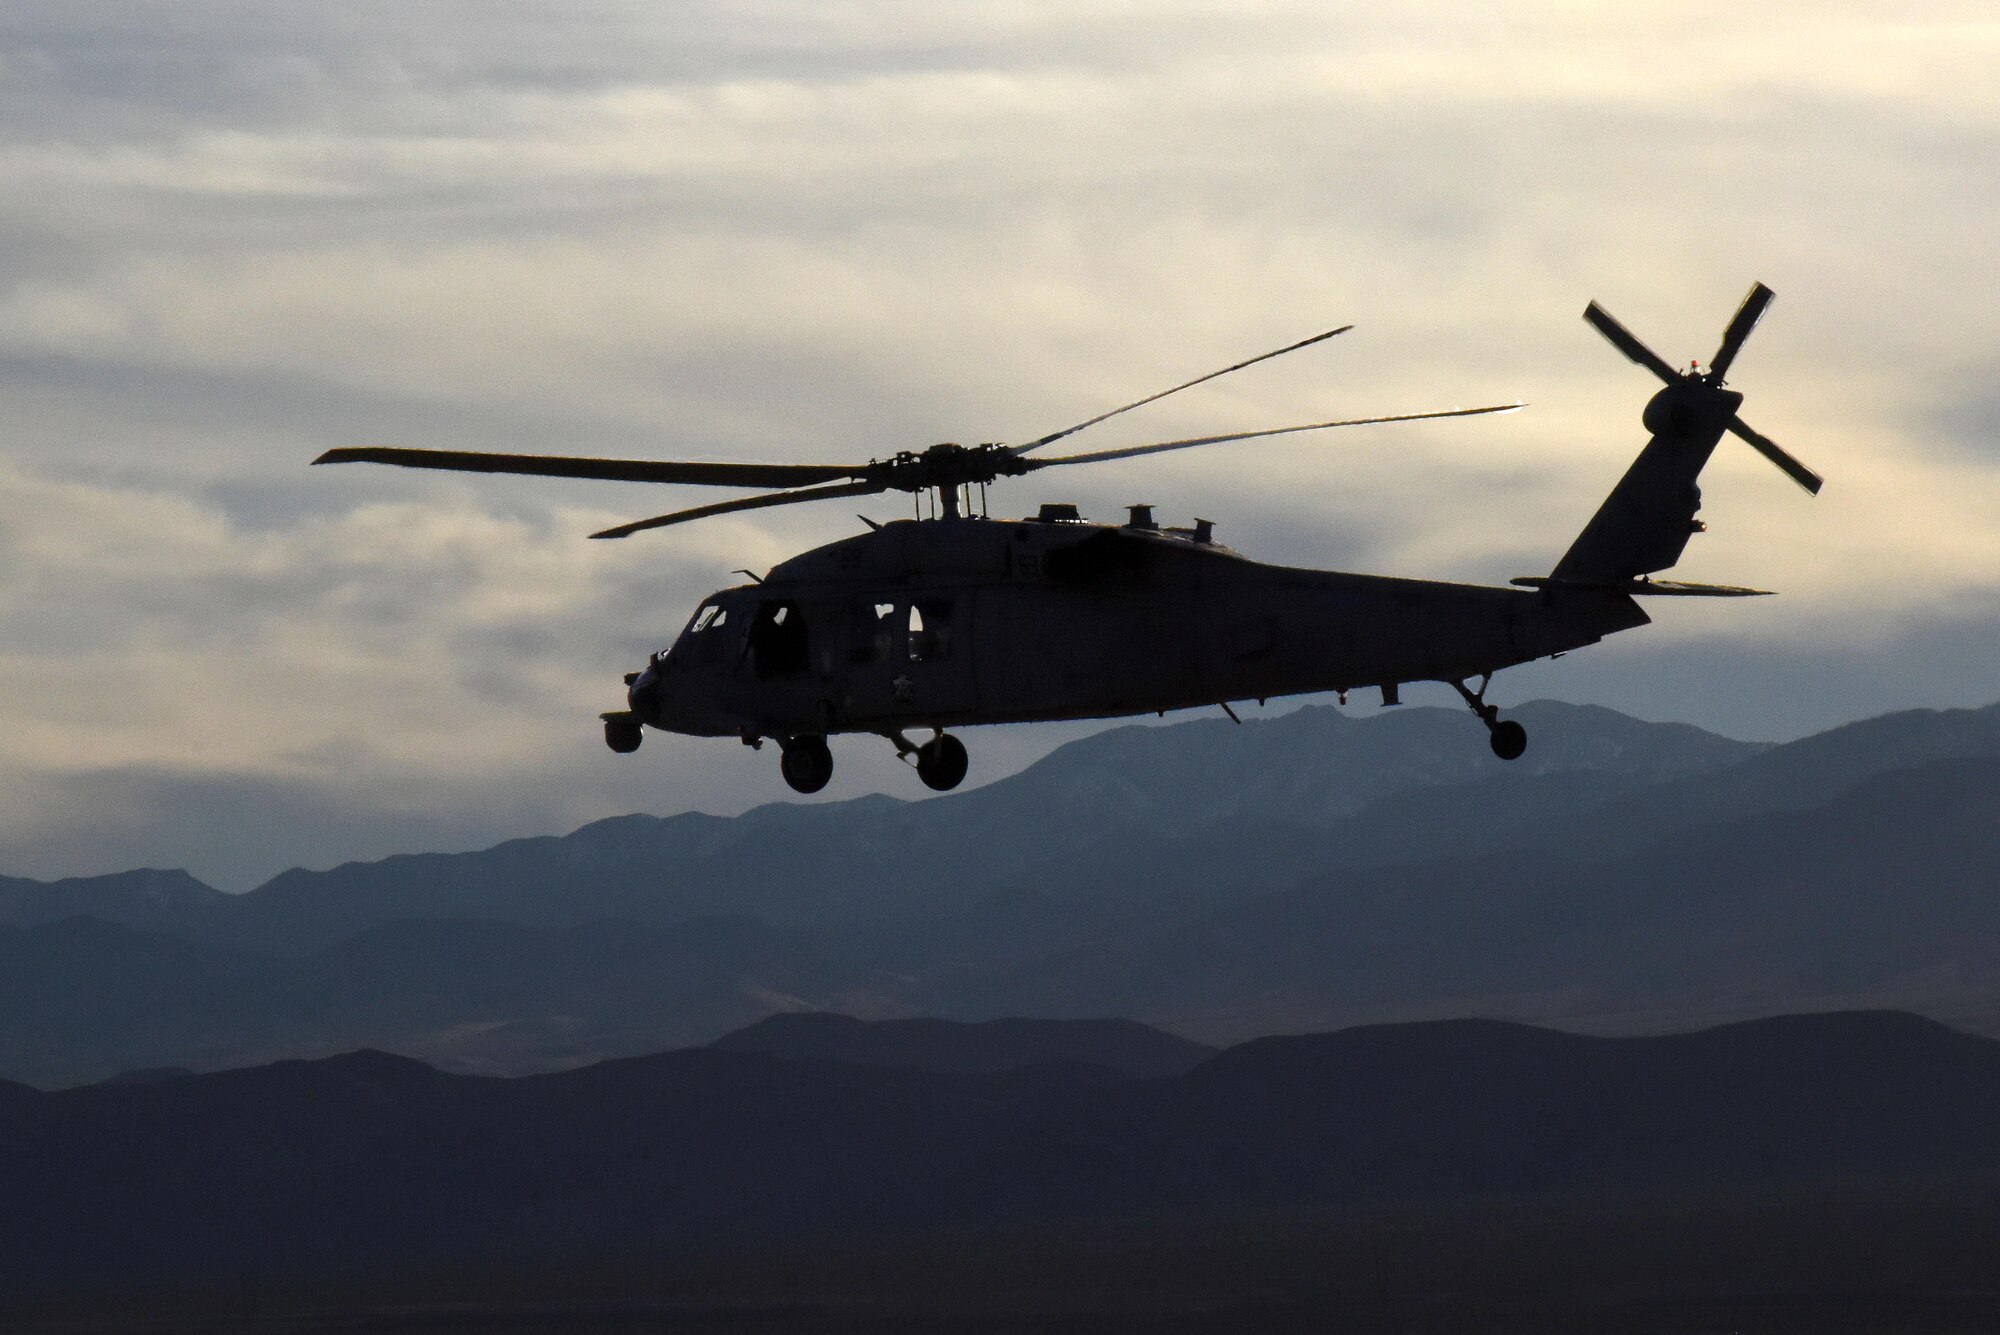 A U.S. Navy MH-60 Seahawk from Naval Air Station North Island, Calif., heads back to Nellis Air Force Base, Nevada following completion of a joint-service personnel rescue training mission March 2, 2016. The mission, part of Red Flag 16-2, involved the extraction of a downed U.S. Air Force F-16 pilot and used assets from several Department of Defense agencies in an effort to enhance joint-operations capabilities. (U.S. Air Force photo/Staff Sgt. Chuck Broadway)